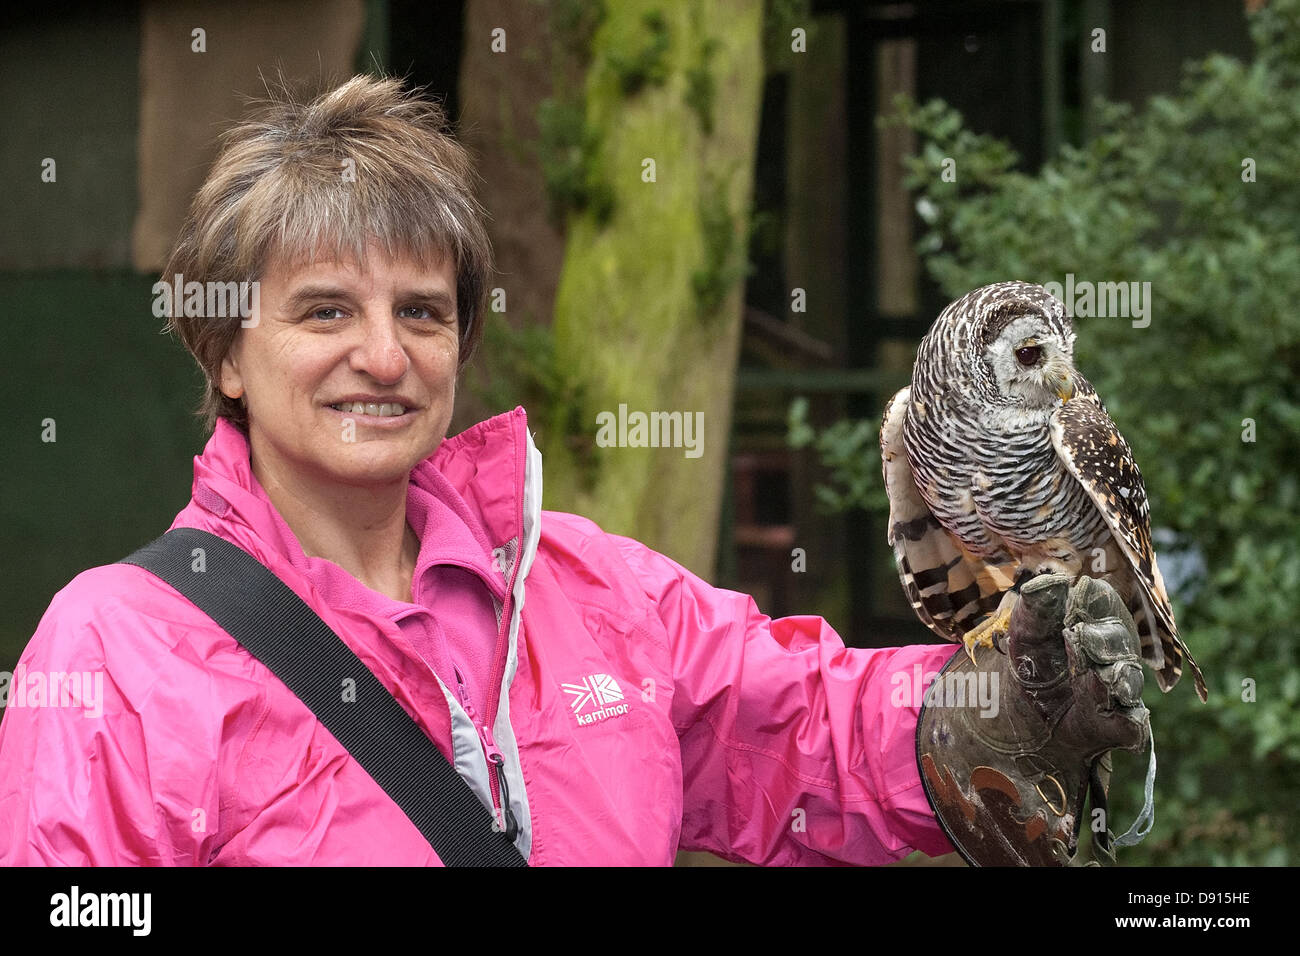 Argentinian Chaco owl, Strix chacoensis, owl resting on woman's arm, Bird Conservation Farm, UK Stock Photo